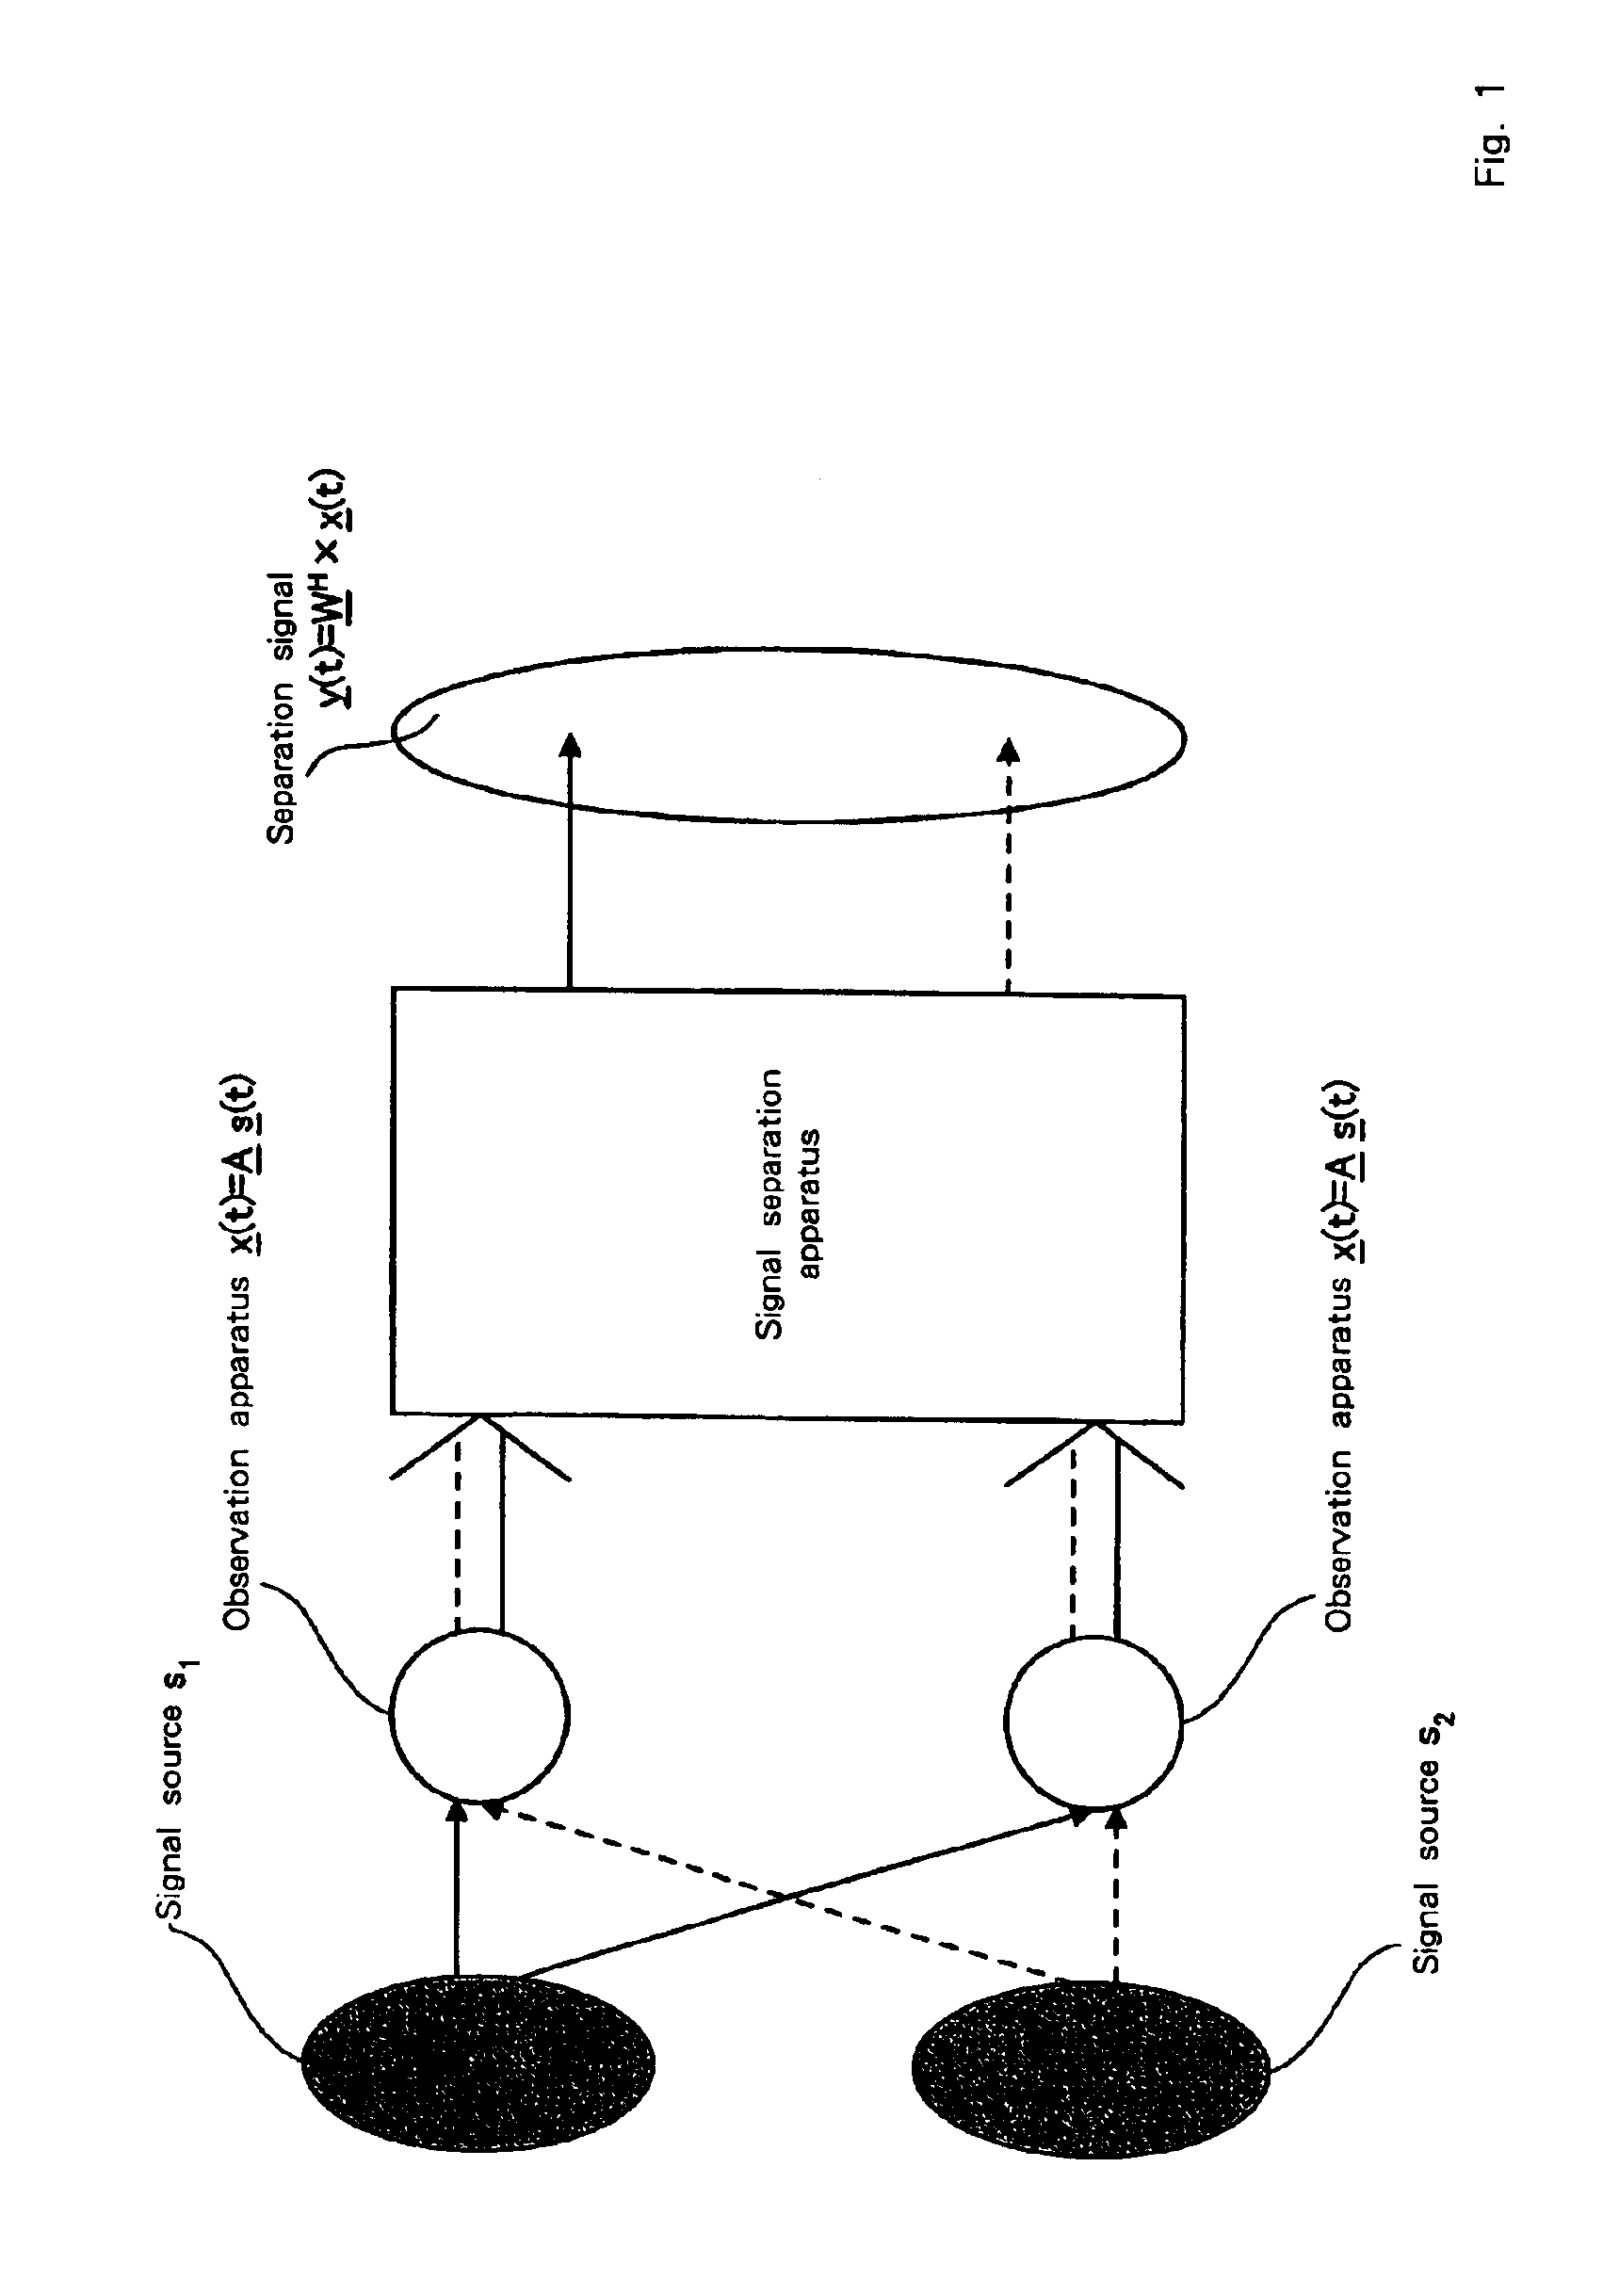 Signal separation method, signal processing apparatus, image processing apparatus, medical image processing apparatus and storage medium for restoring multidimensional signals from observed data in which multiple signals are mixed